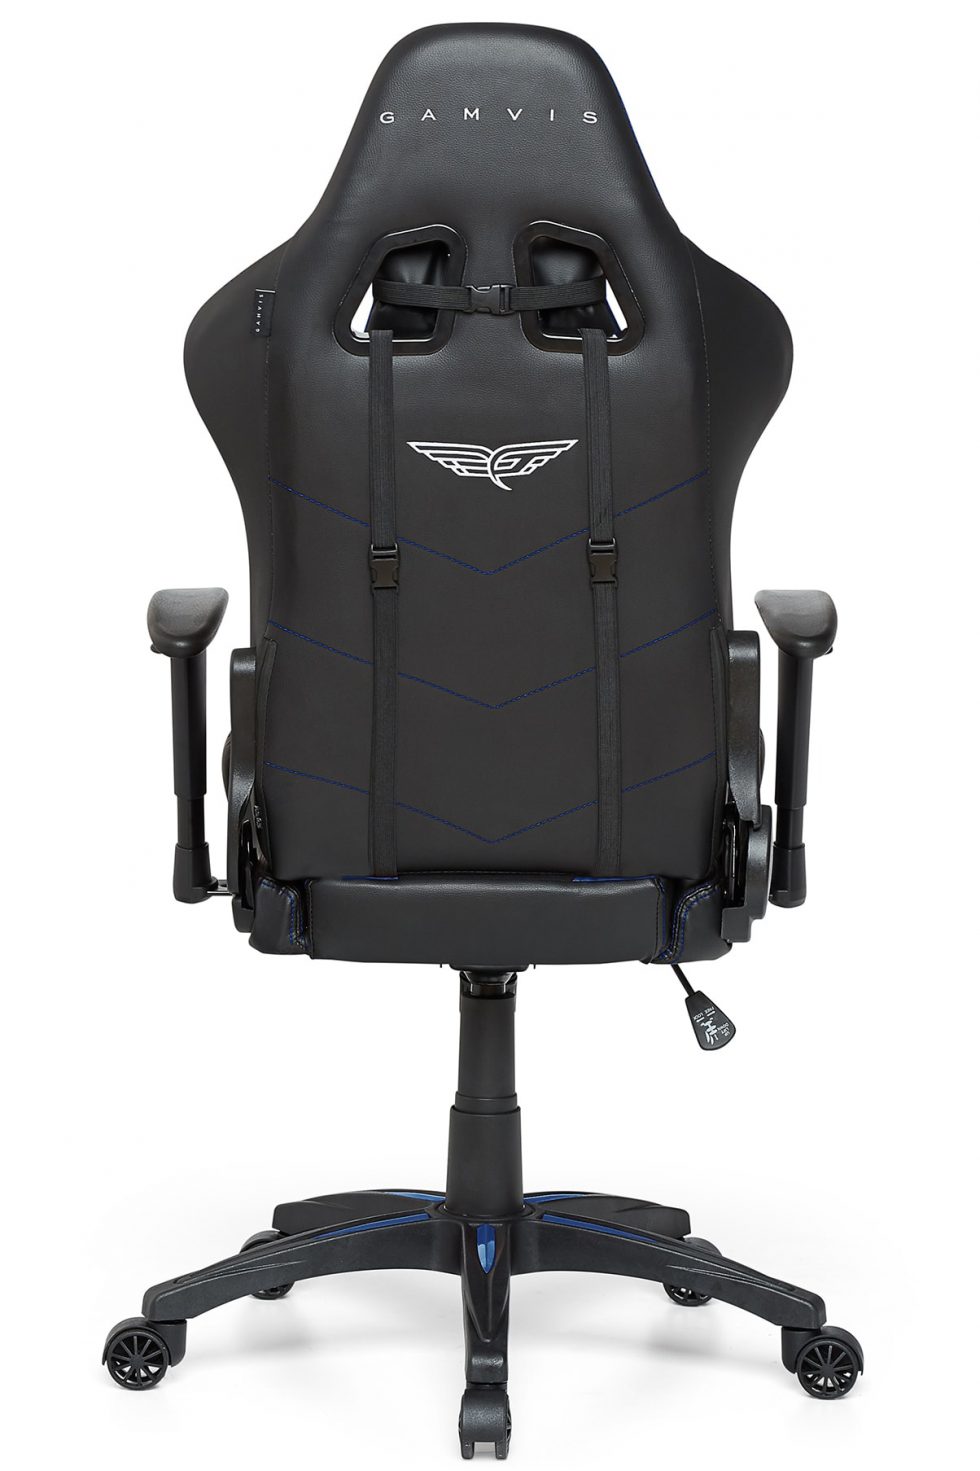 Gamvis Expert Gaming Chair Black Blue Fabric